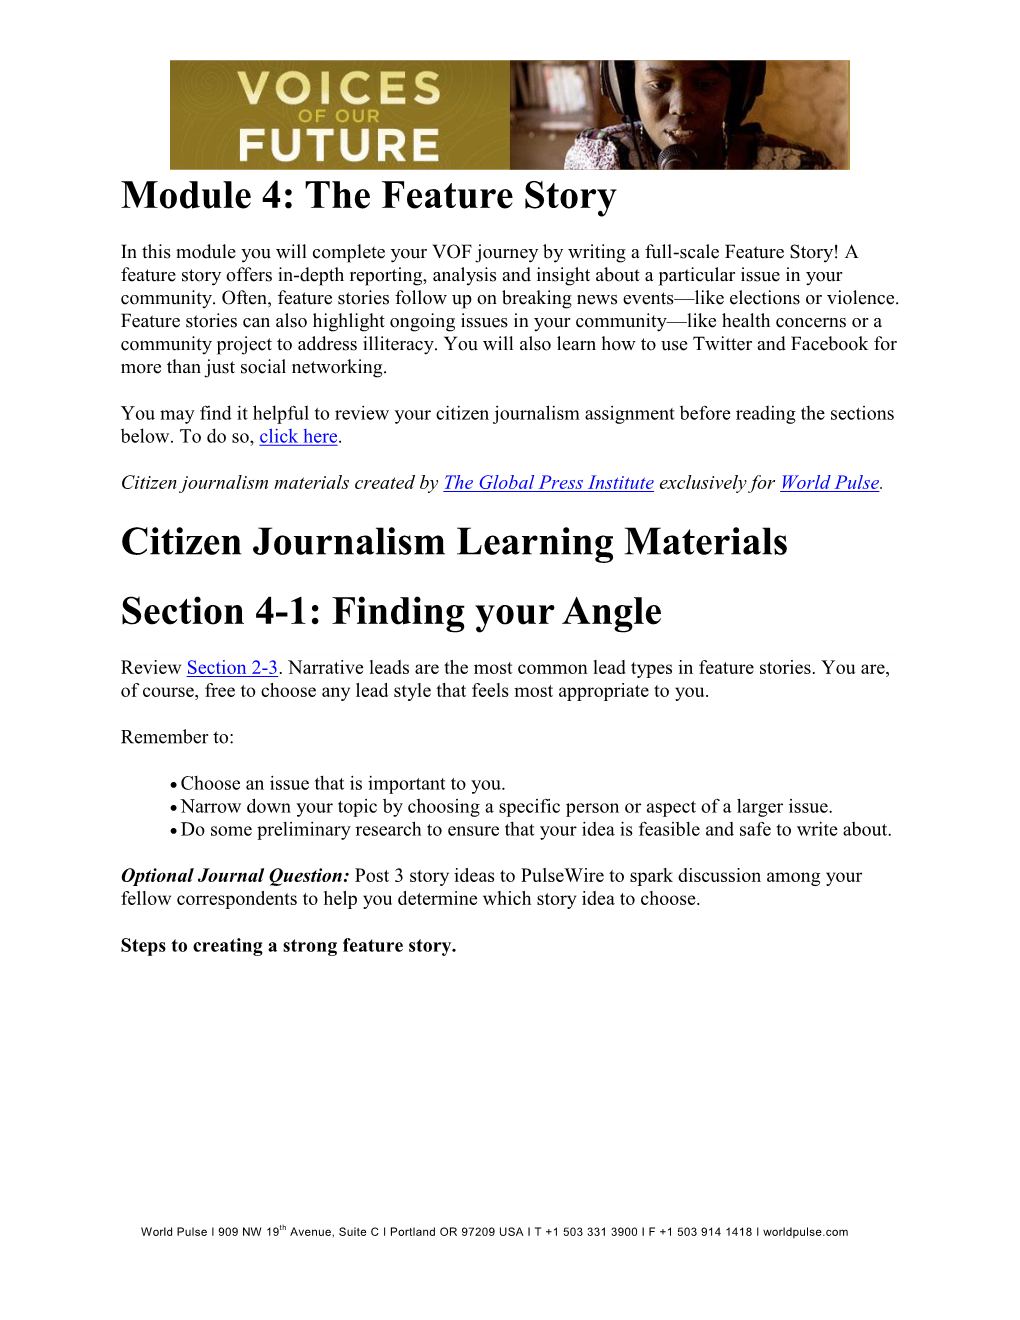 Module 4: the Feature Story